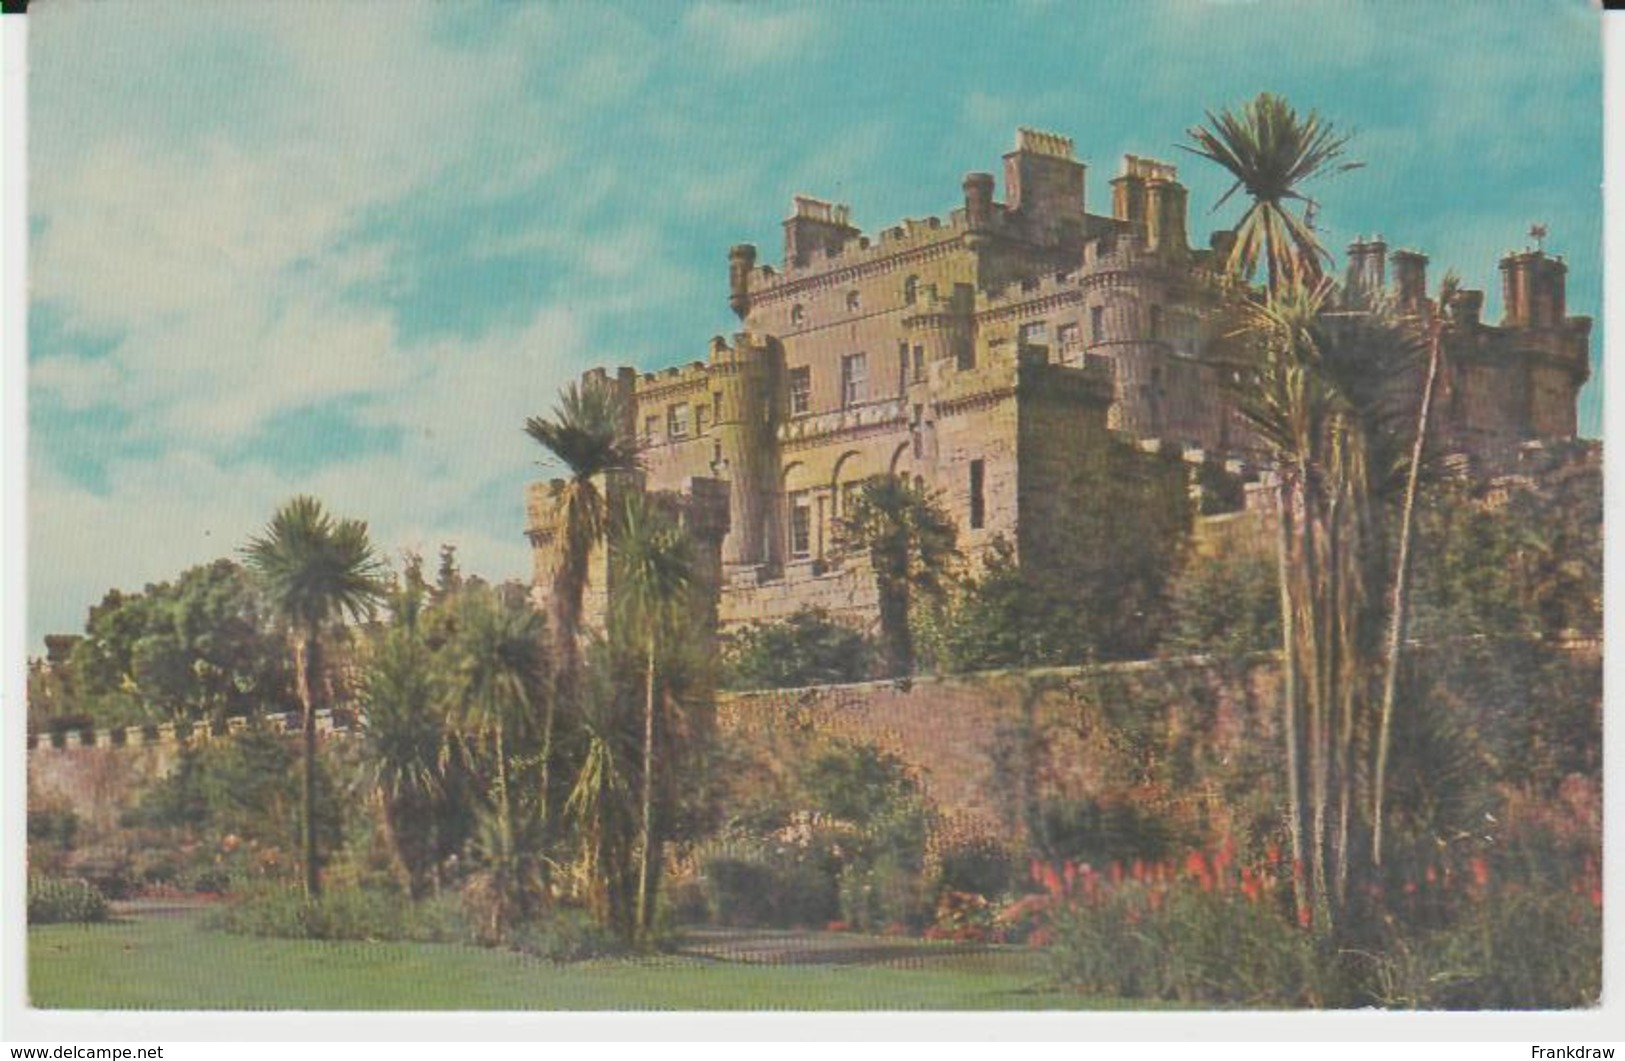 Postcard - Culzean Castle, Ayeshire - Posted 11th Aug 1965 Very Good - Unclassified